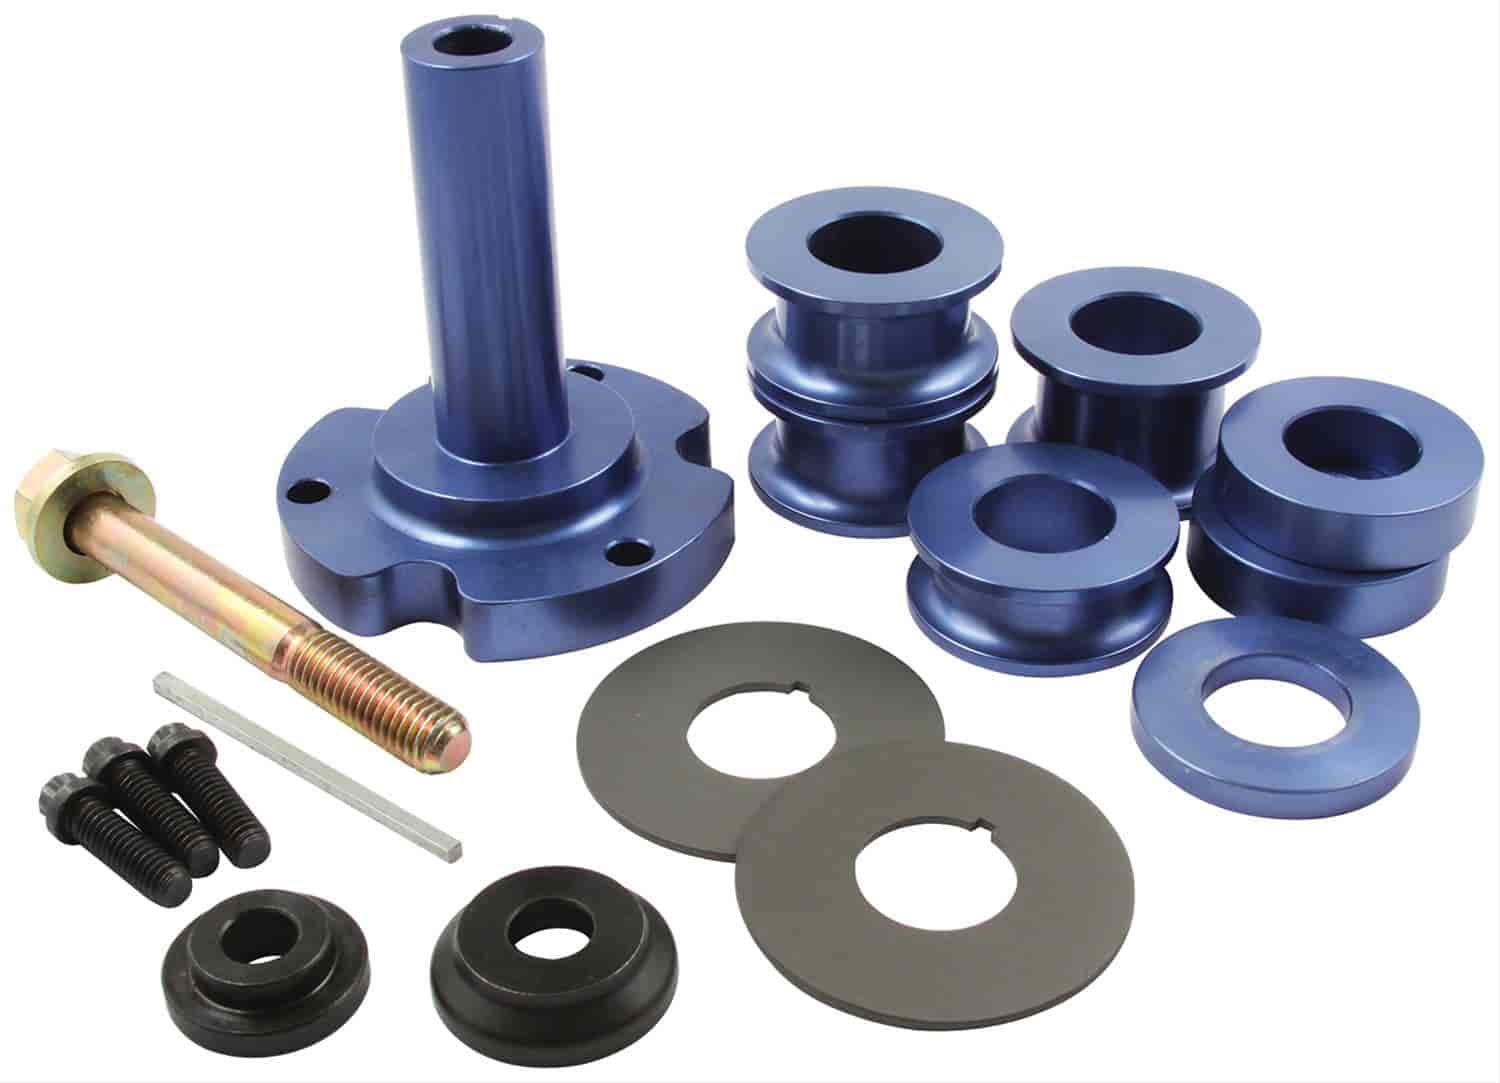 Crank Pulley Mandrel Kit Includes: Spacers, Pulley Guides,